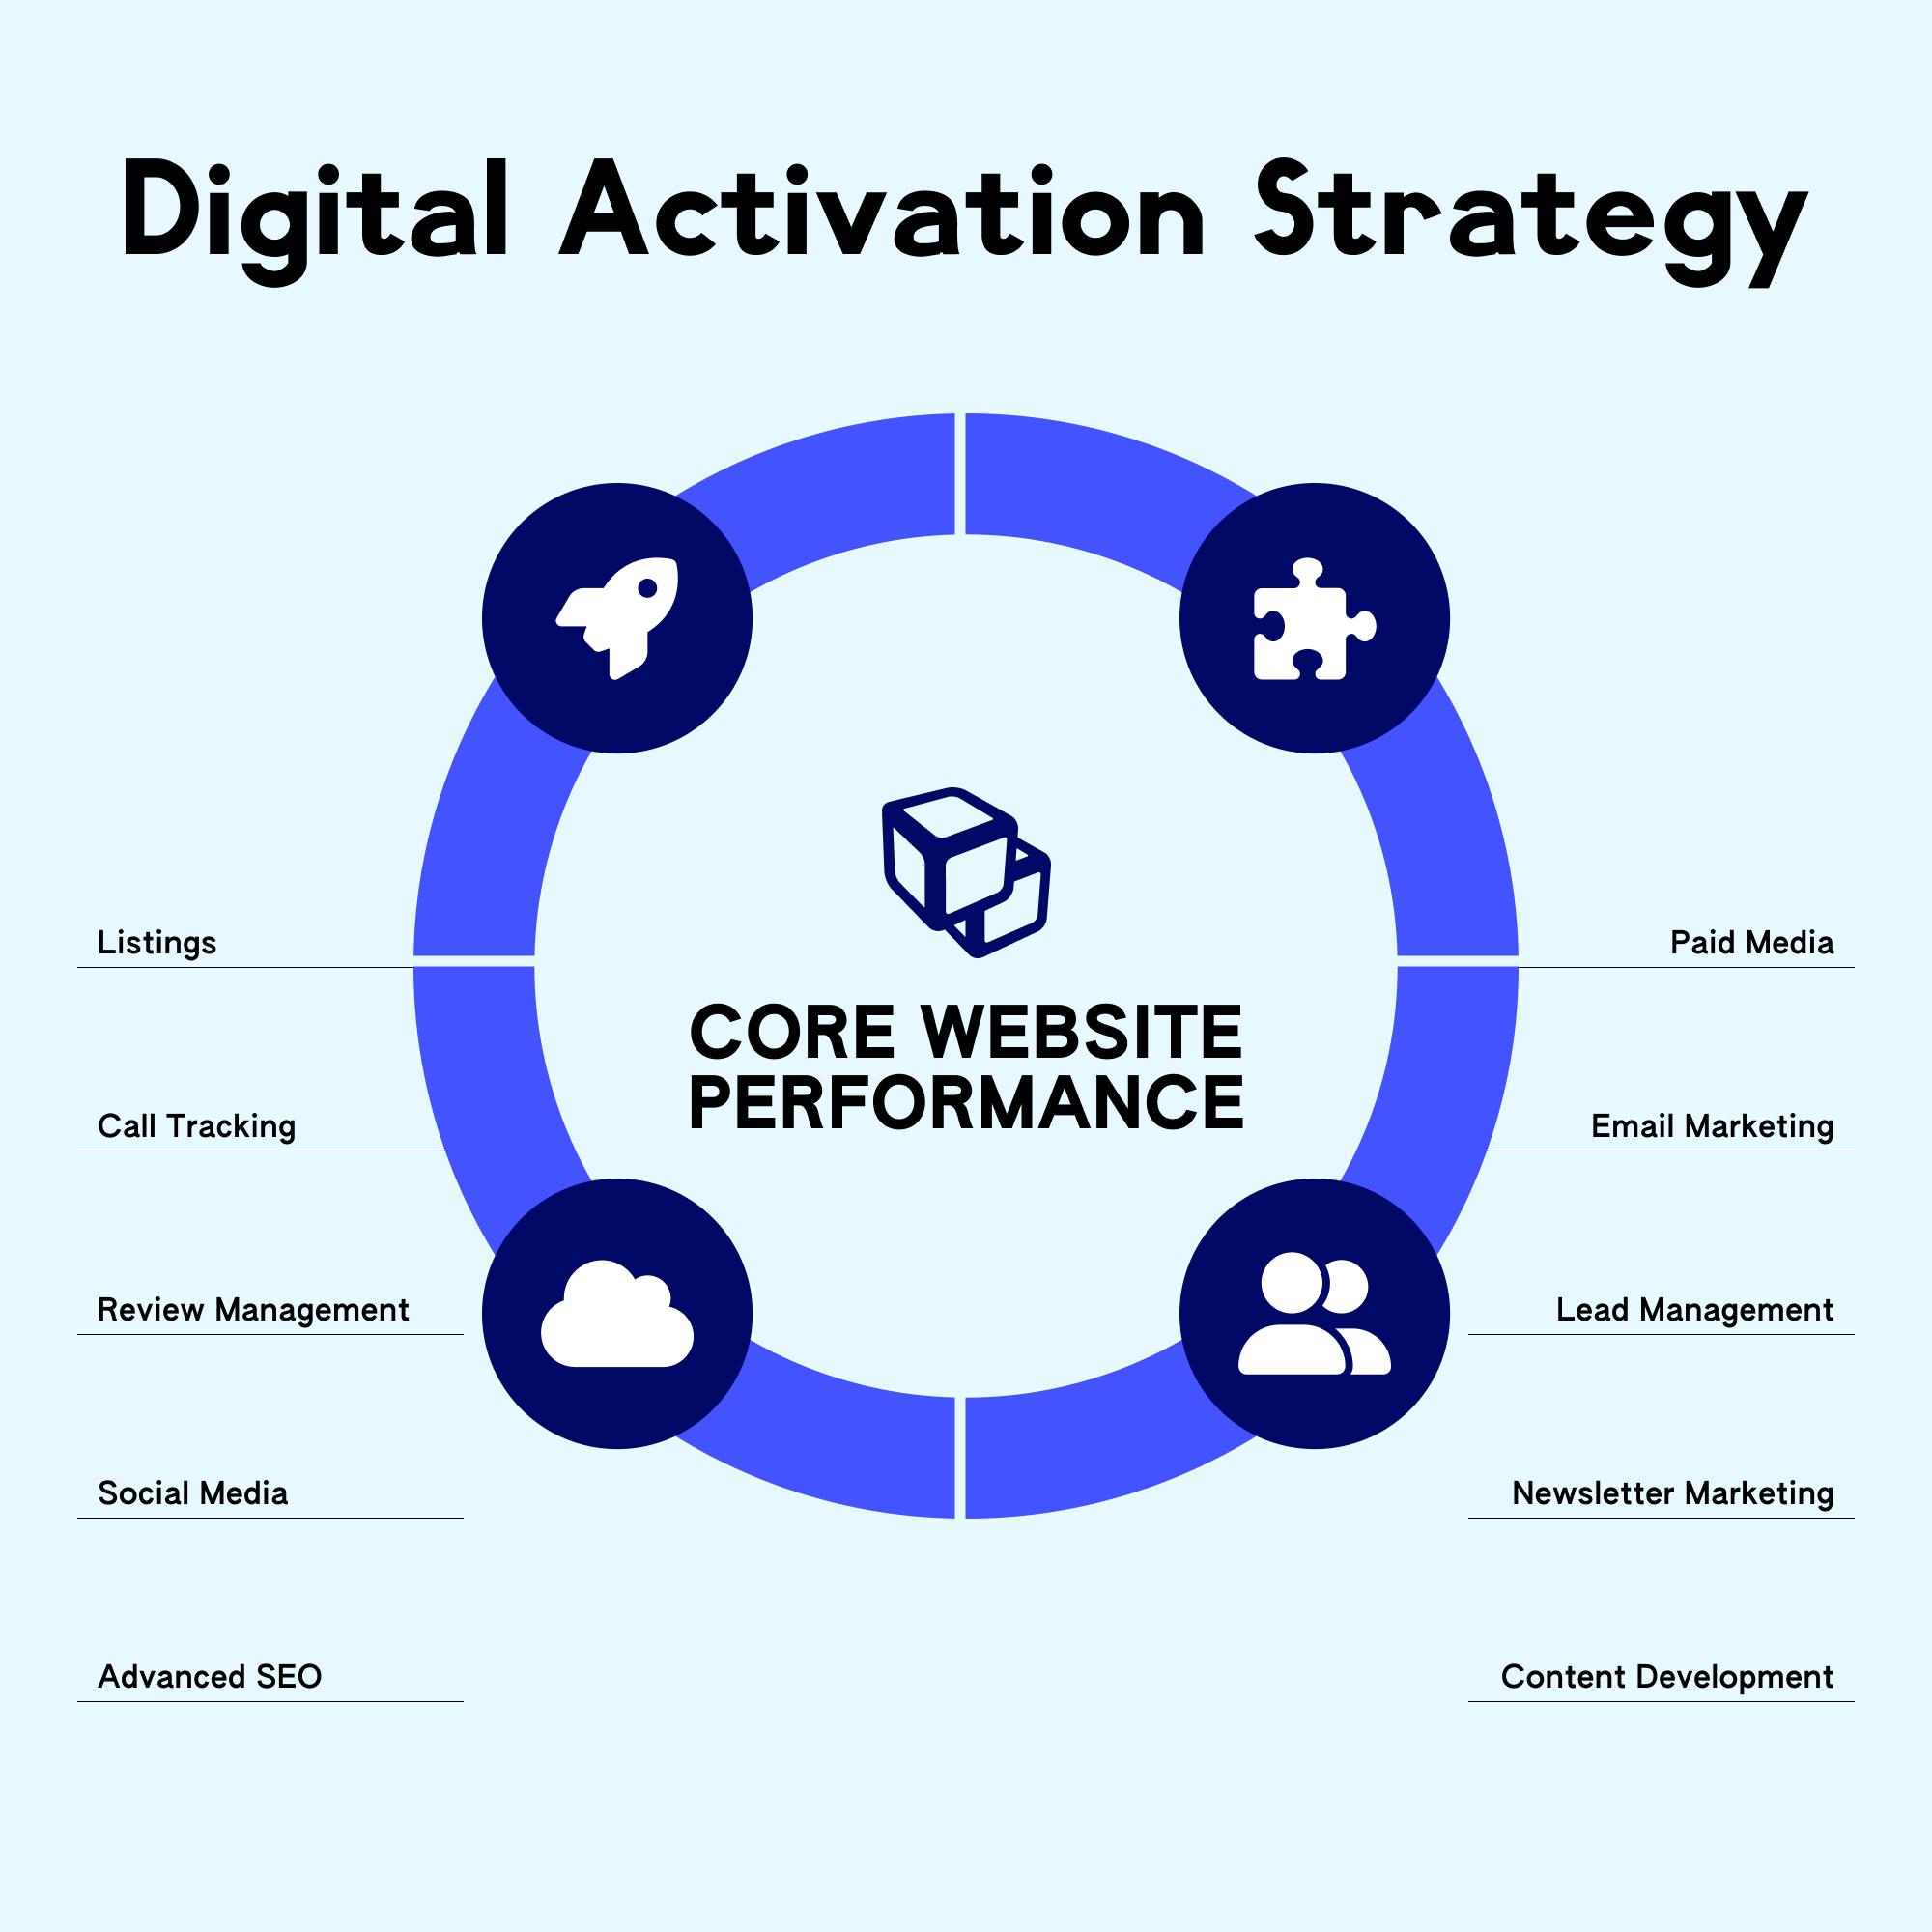 Digital Activation Strategy